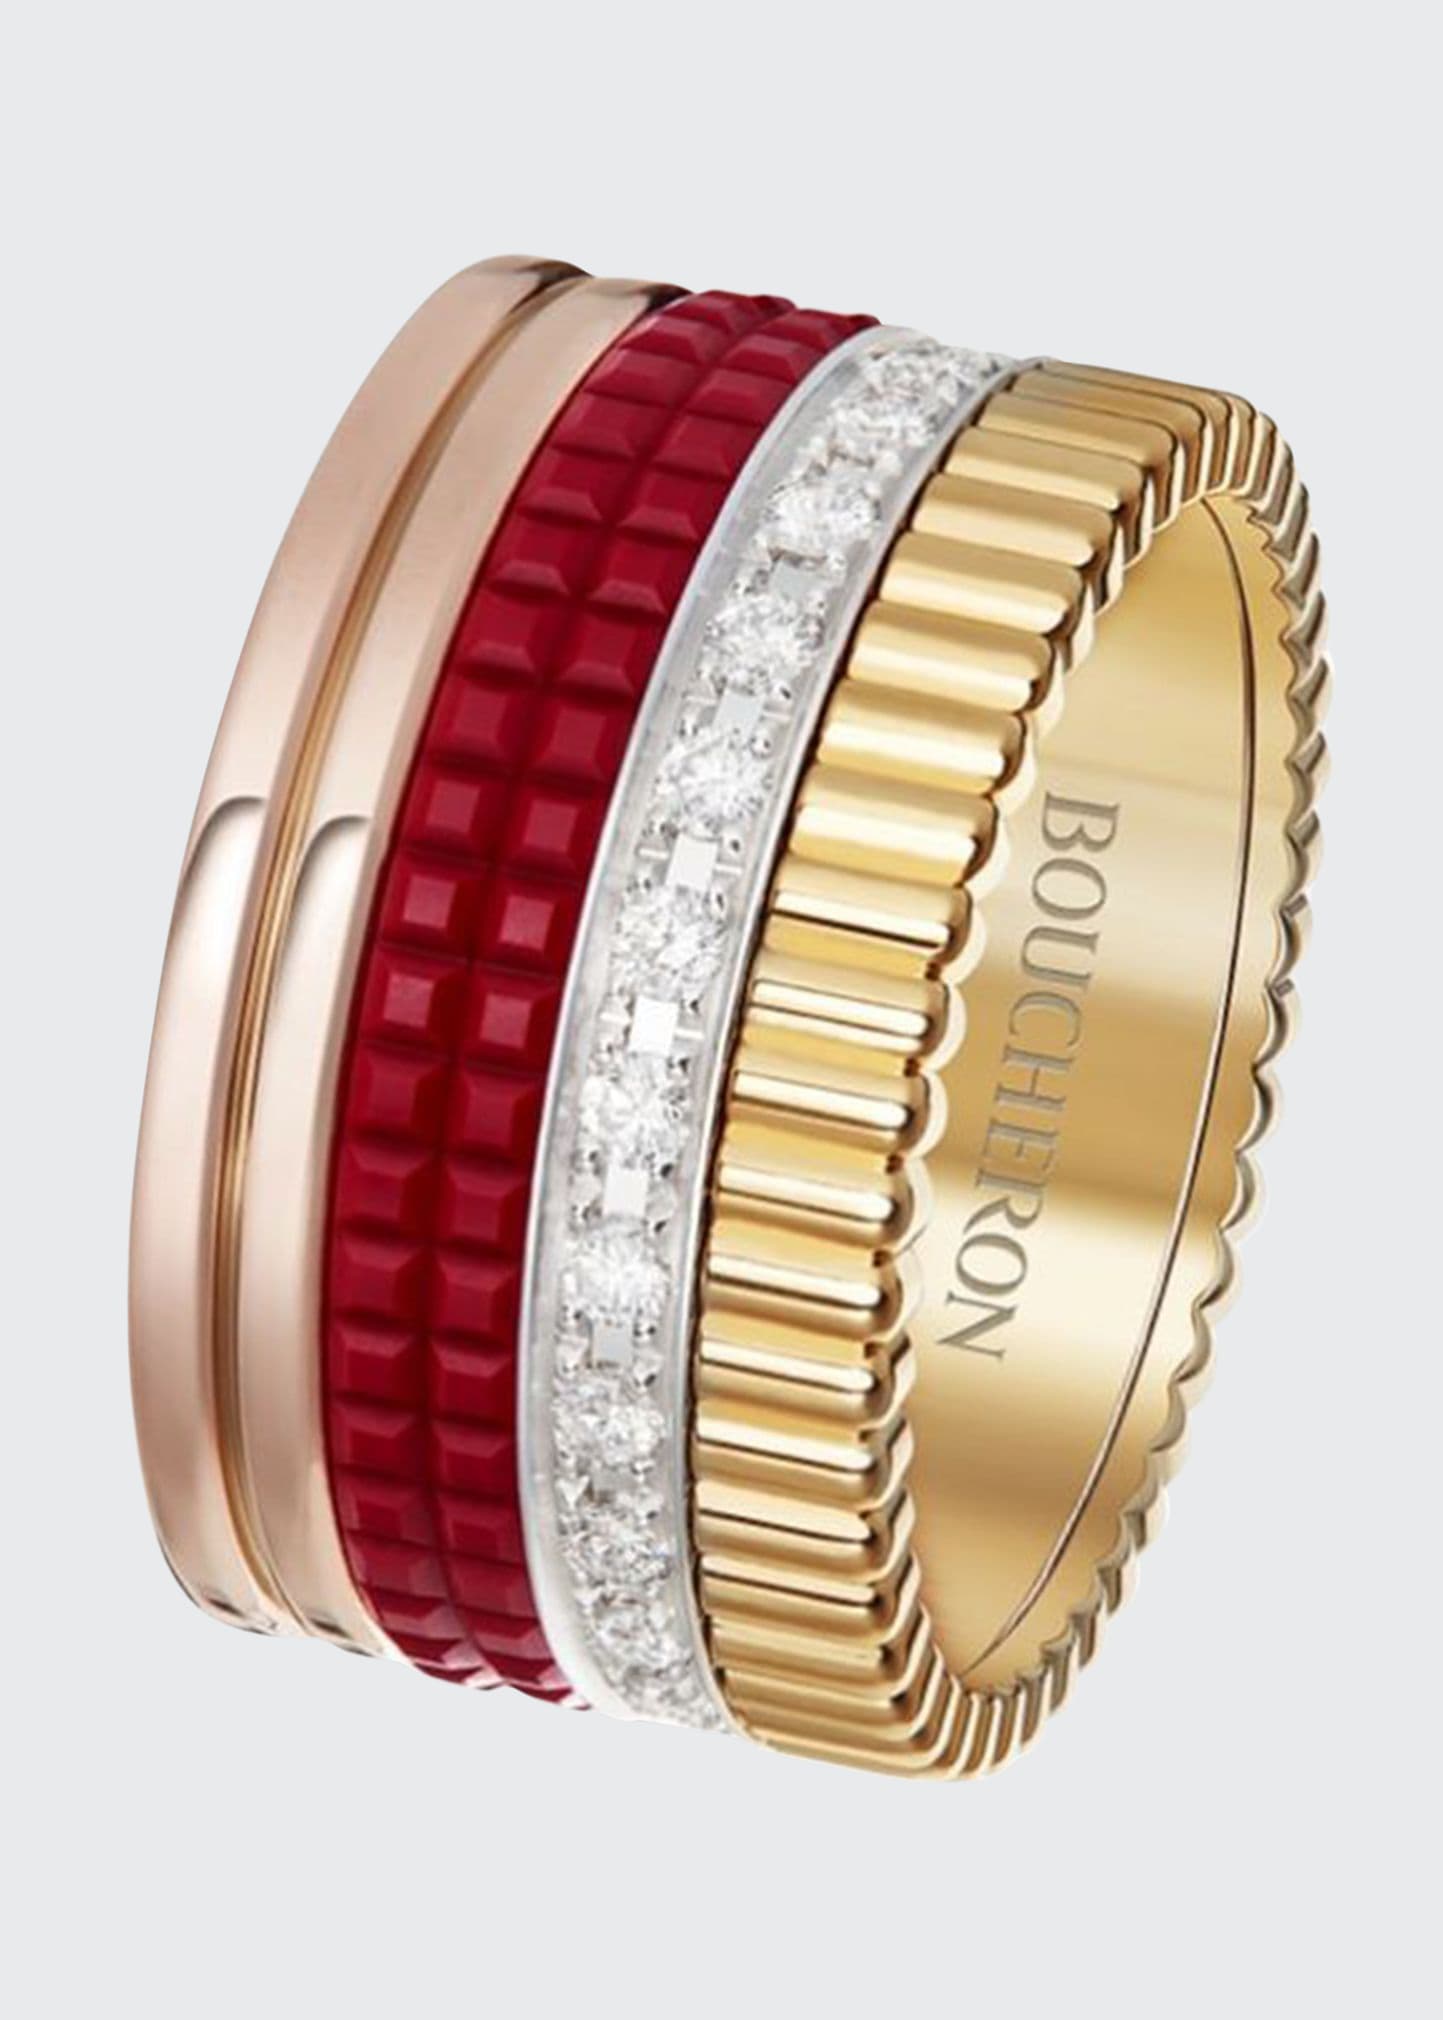 Boucheron Quatre Large Ring in Tricolor Gold with Red Ceramic and Diamonds, Size 54